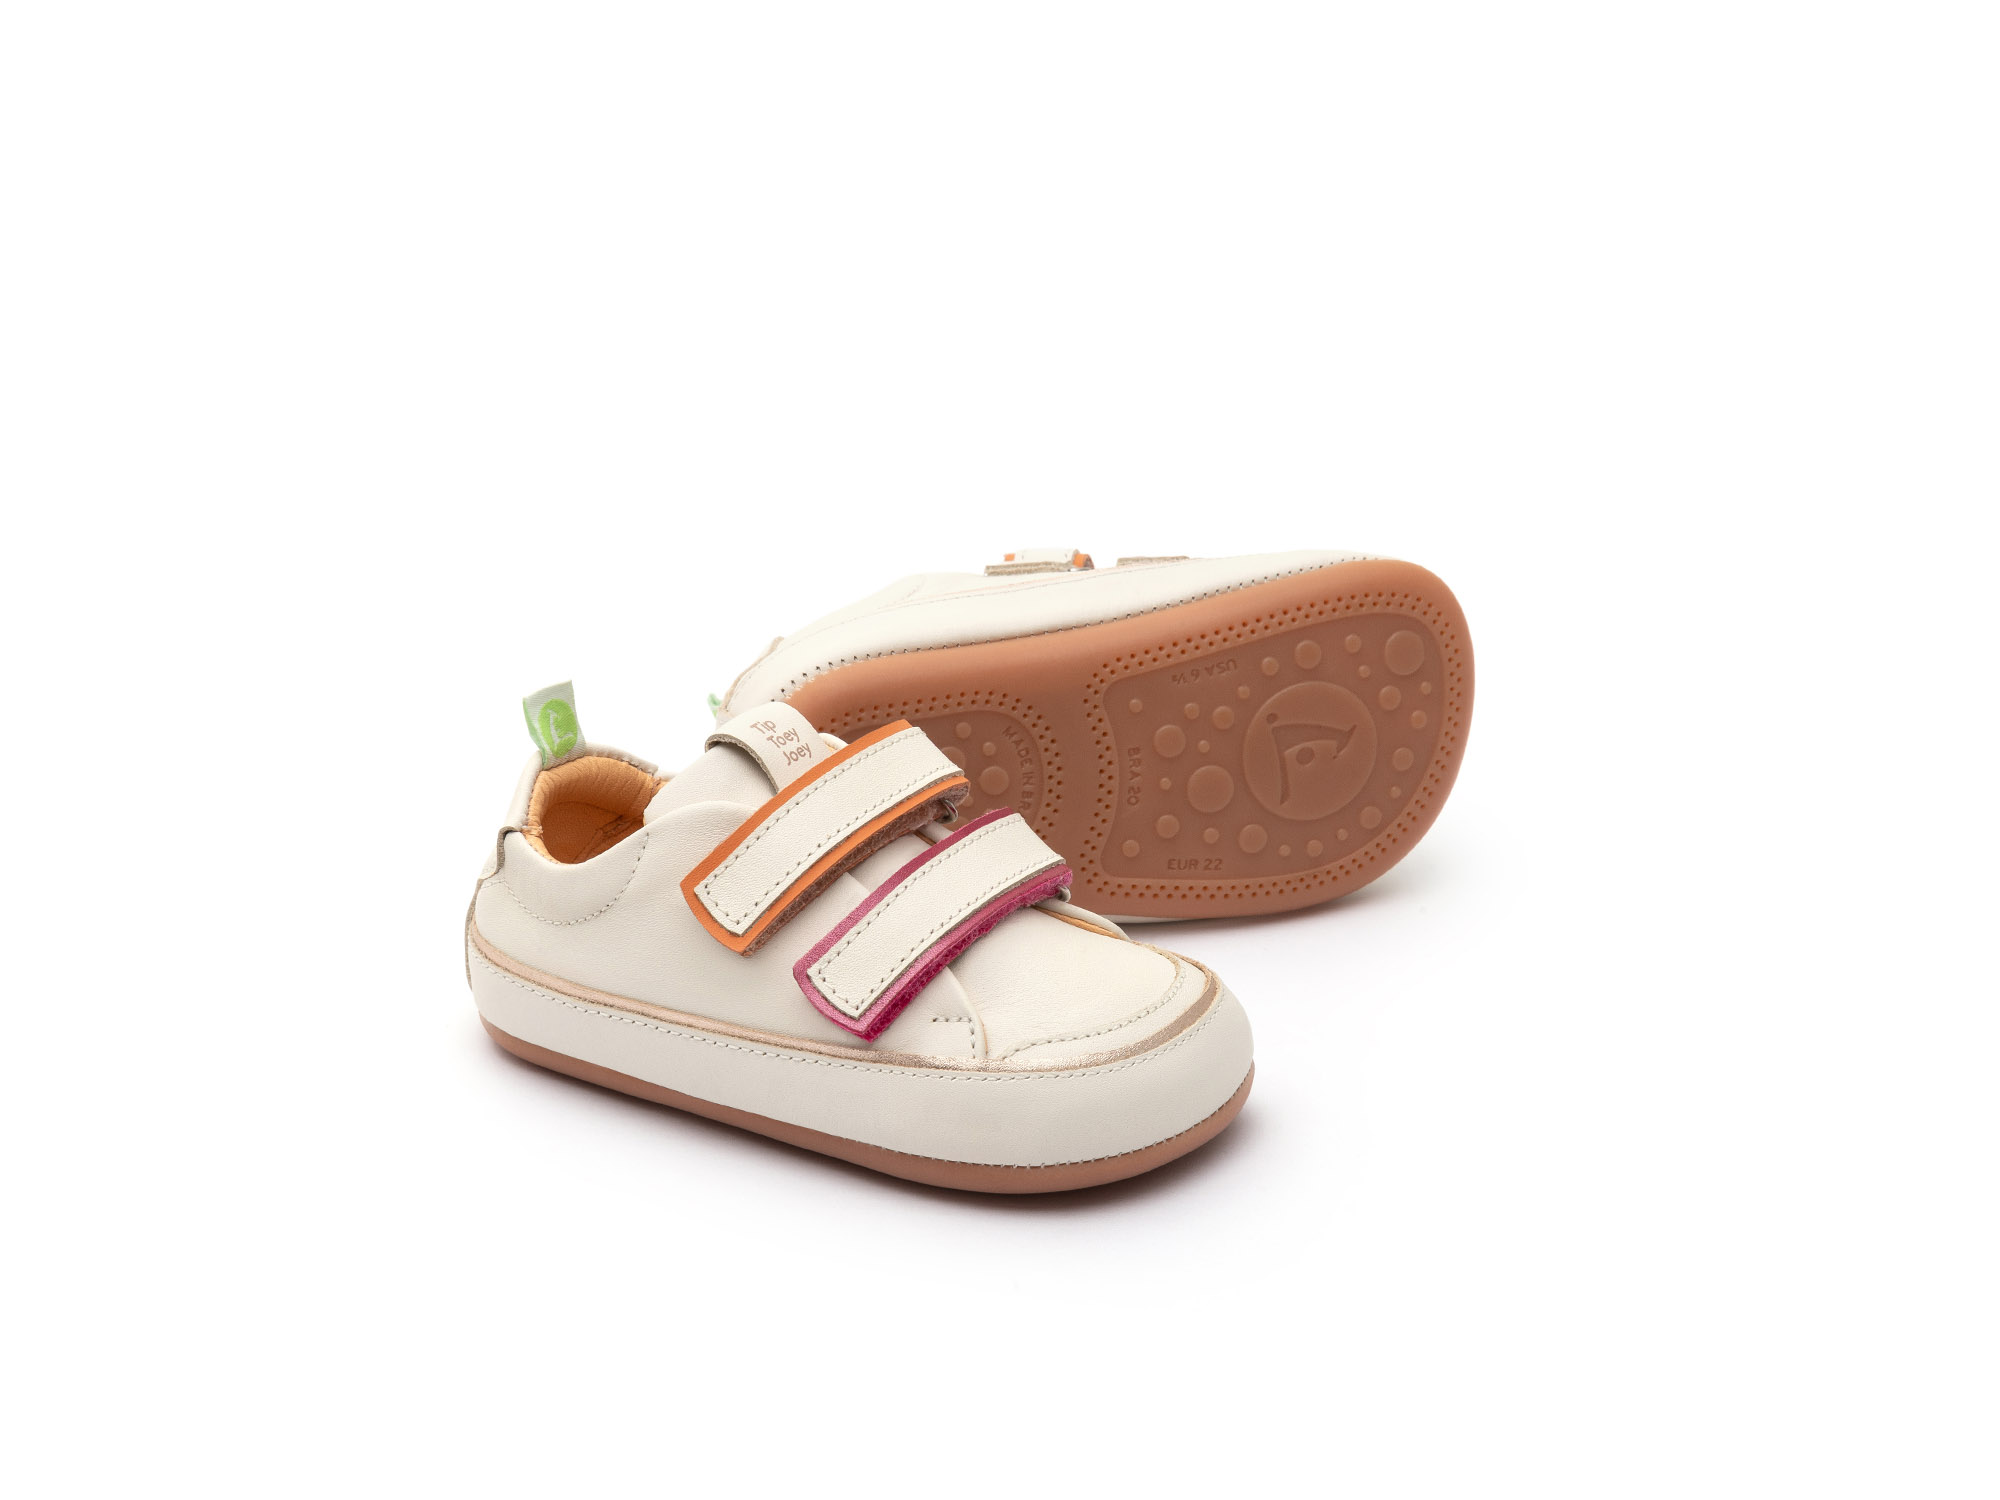 UP & GO Sneakers for Girls Bossy Colors | Tip Toey Joey - Australia - 0